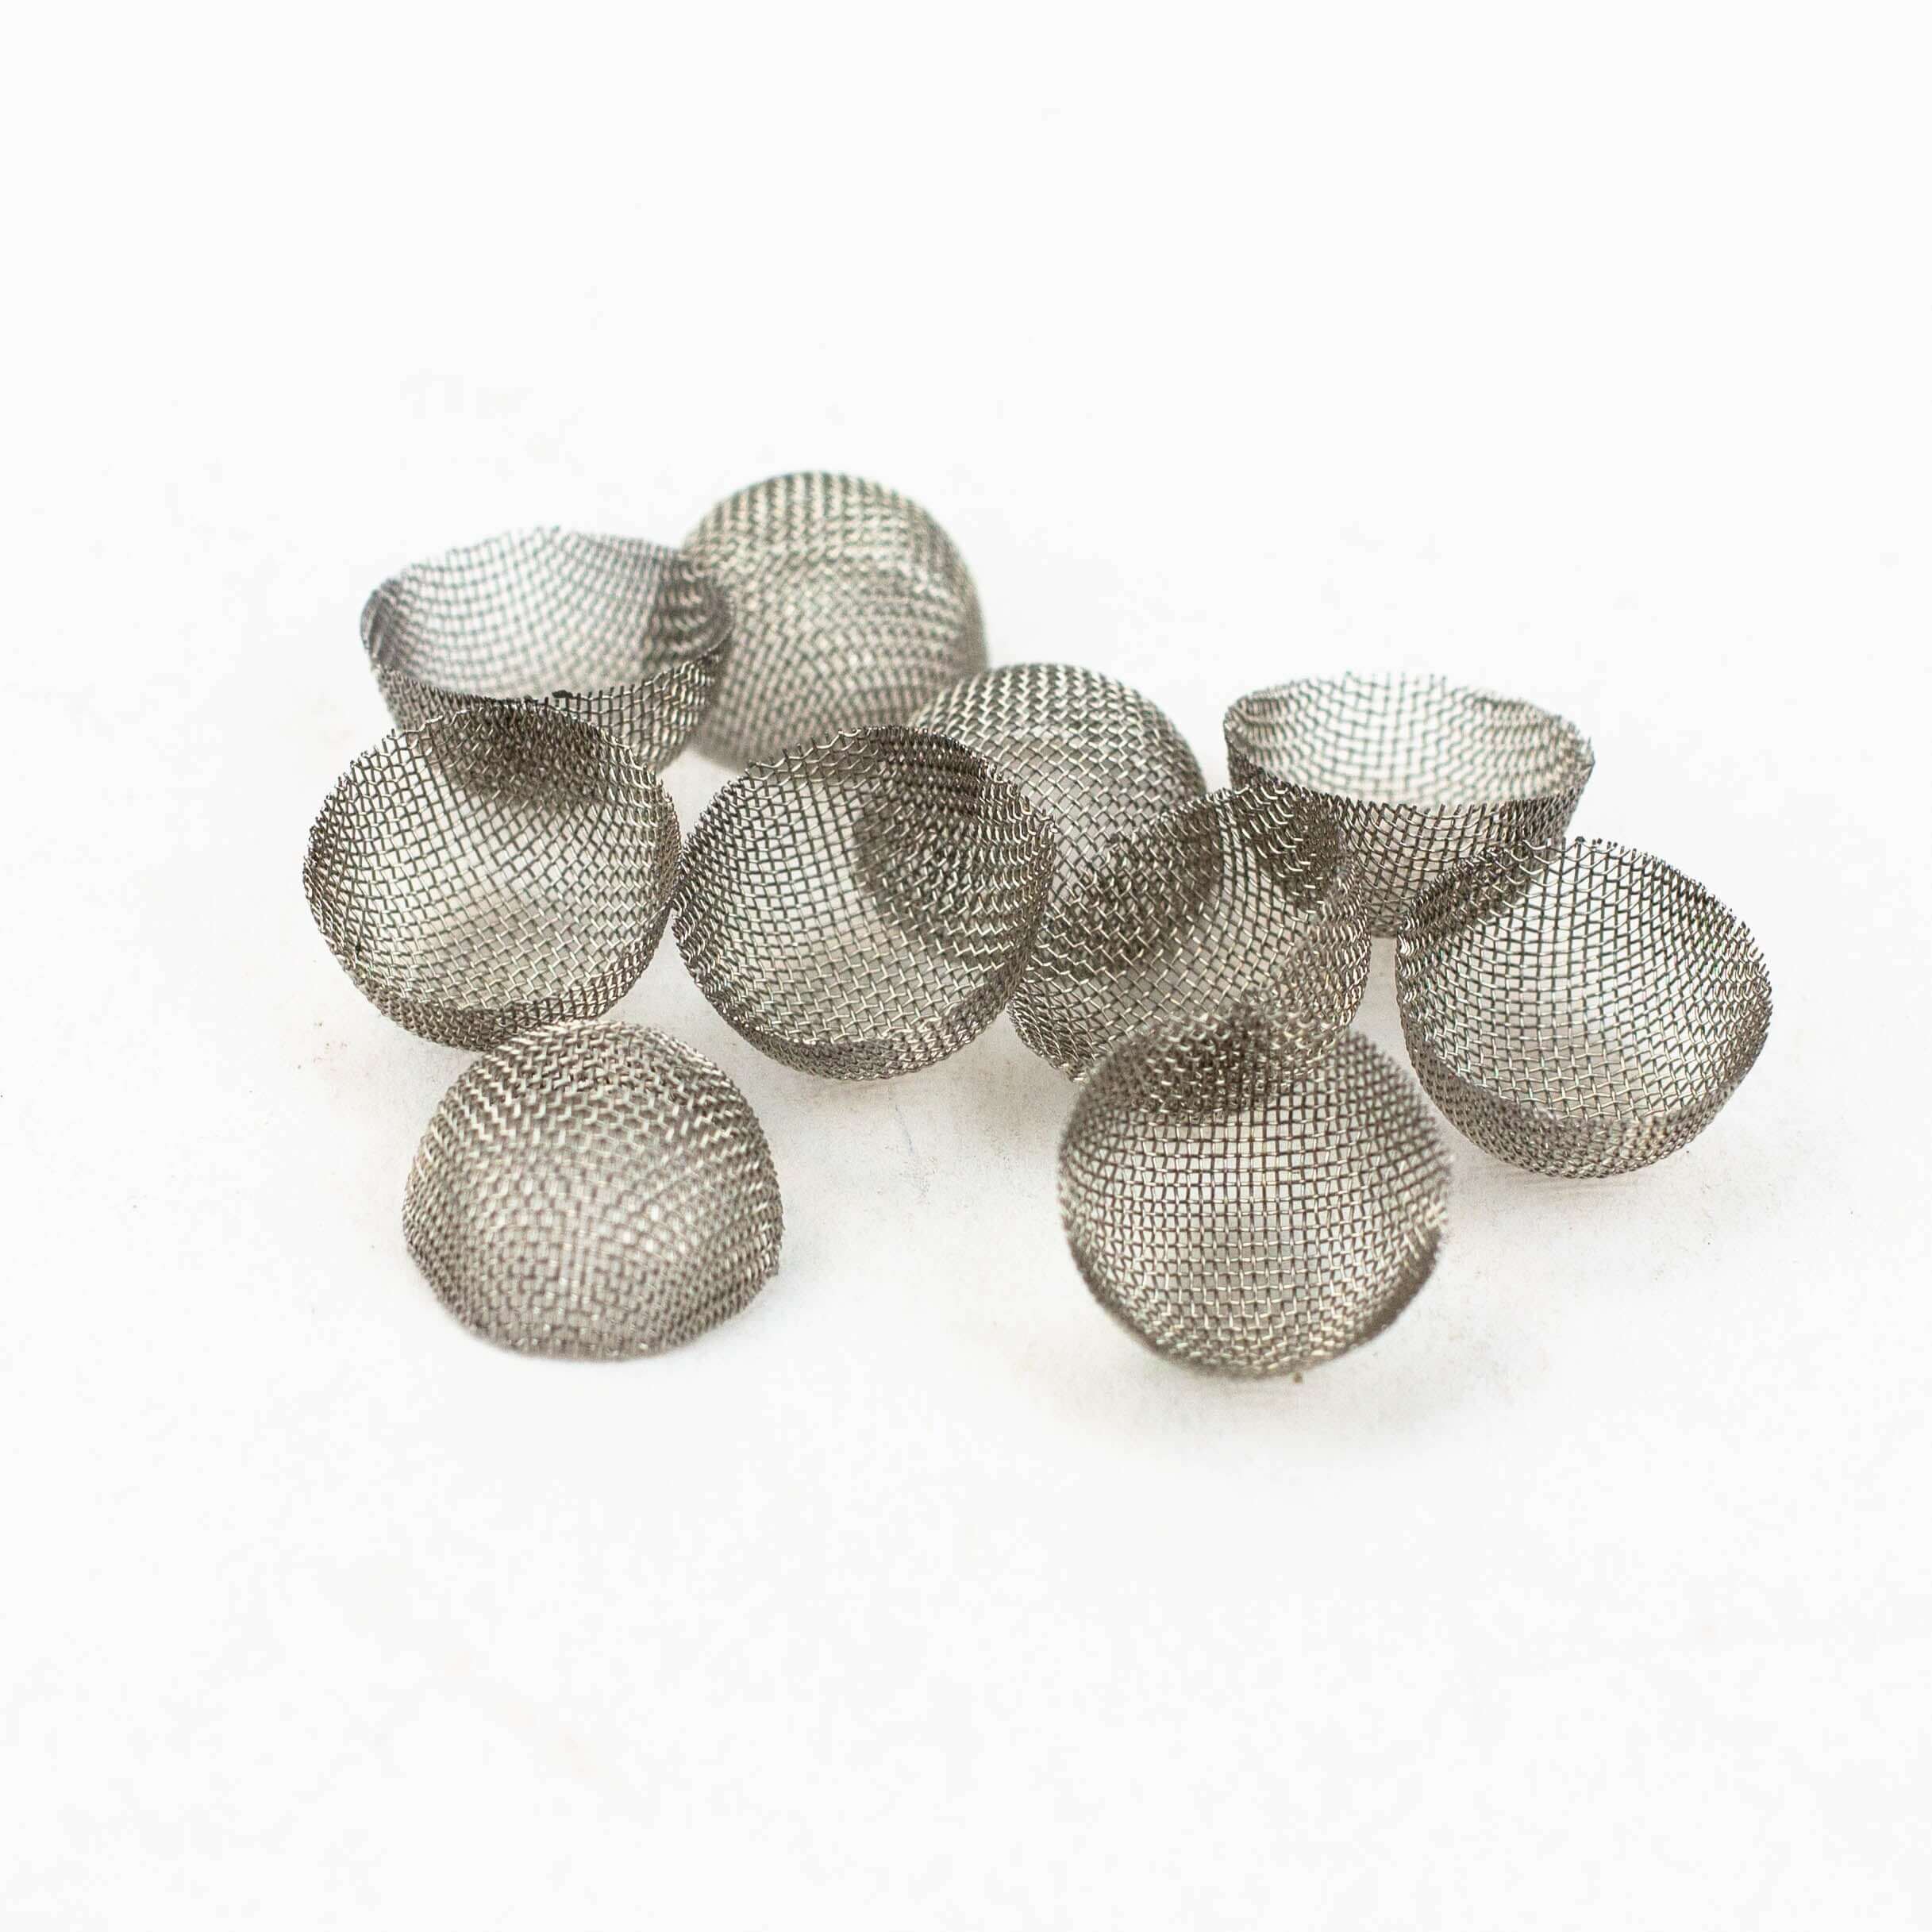 Acid Secs - 10 Pack of Preformed 13 mm Diameter Bowl Screens
Acid Secs Productions Inc.
10 pieces of bowl screens per pack 13mm diameter Preformed fine screen Eligible for $15 Flat Rate Shipping
Screens, Smoking Essentials